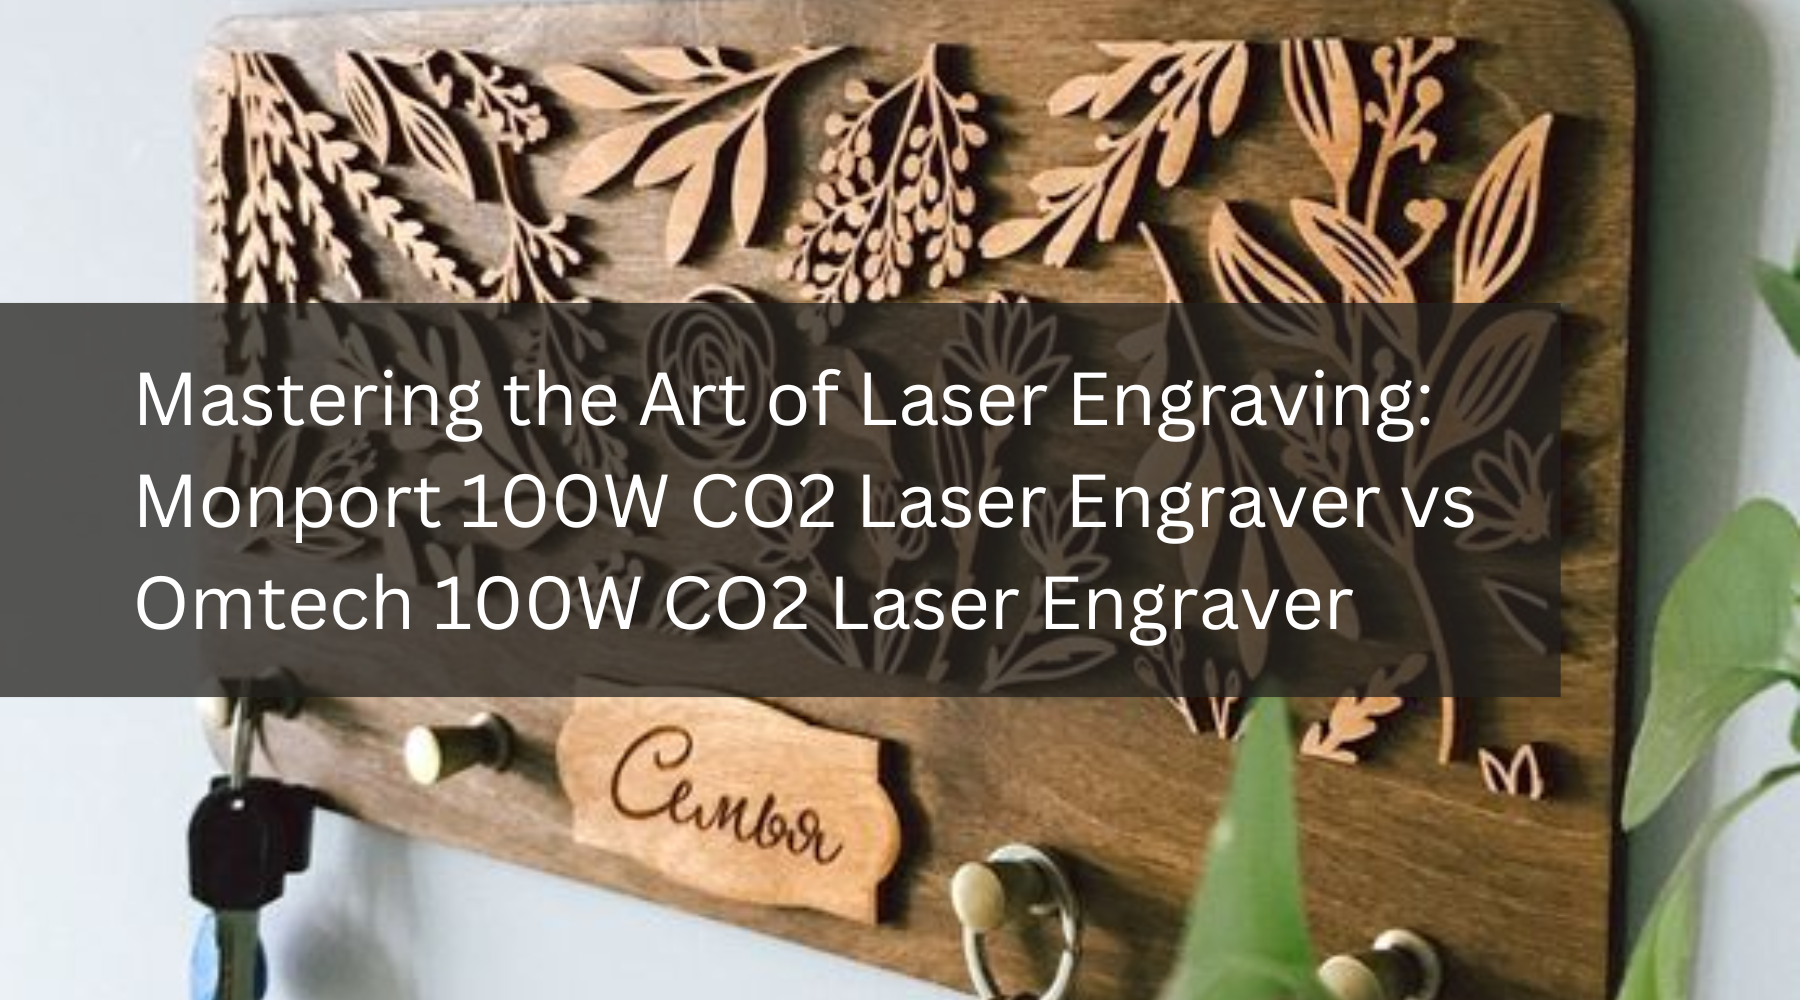 Mastering the Art of Laser Engraving: A Comprehensive Guide to the Monport 100W CO2 Laser Engraver and Omtech 100W CO2 Laser Engraver